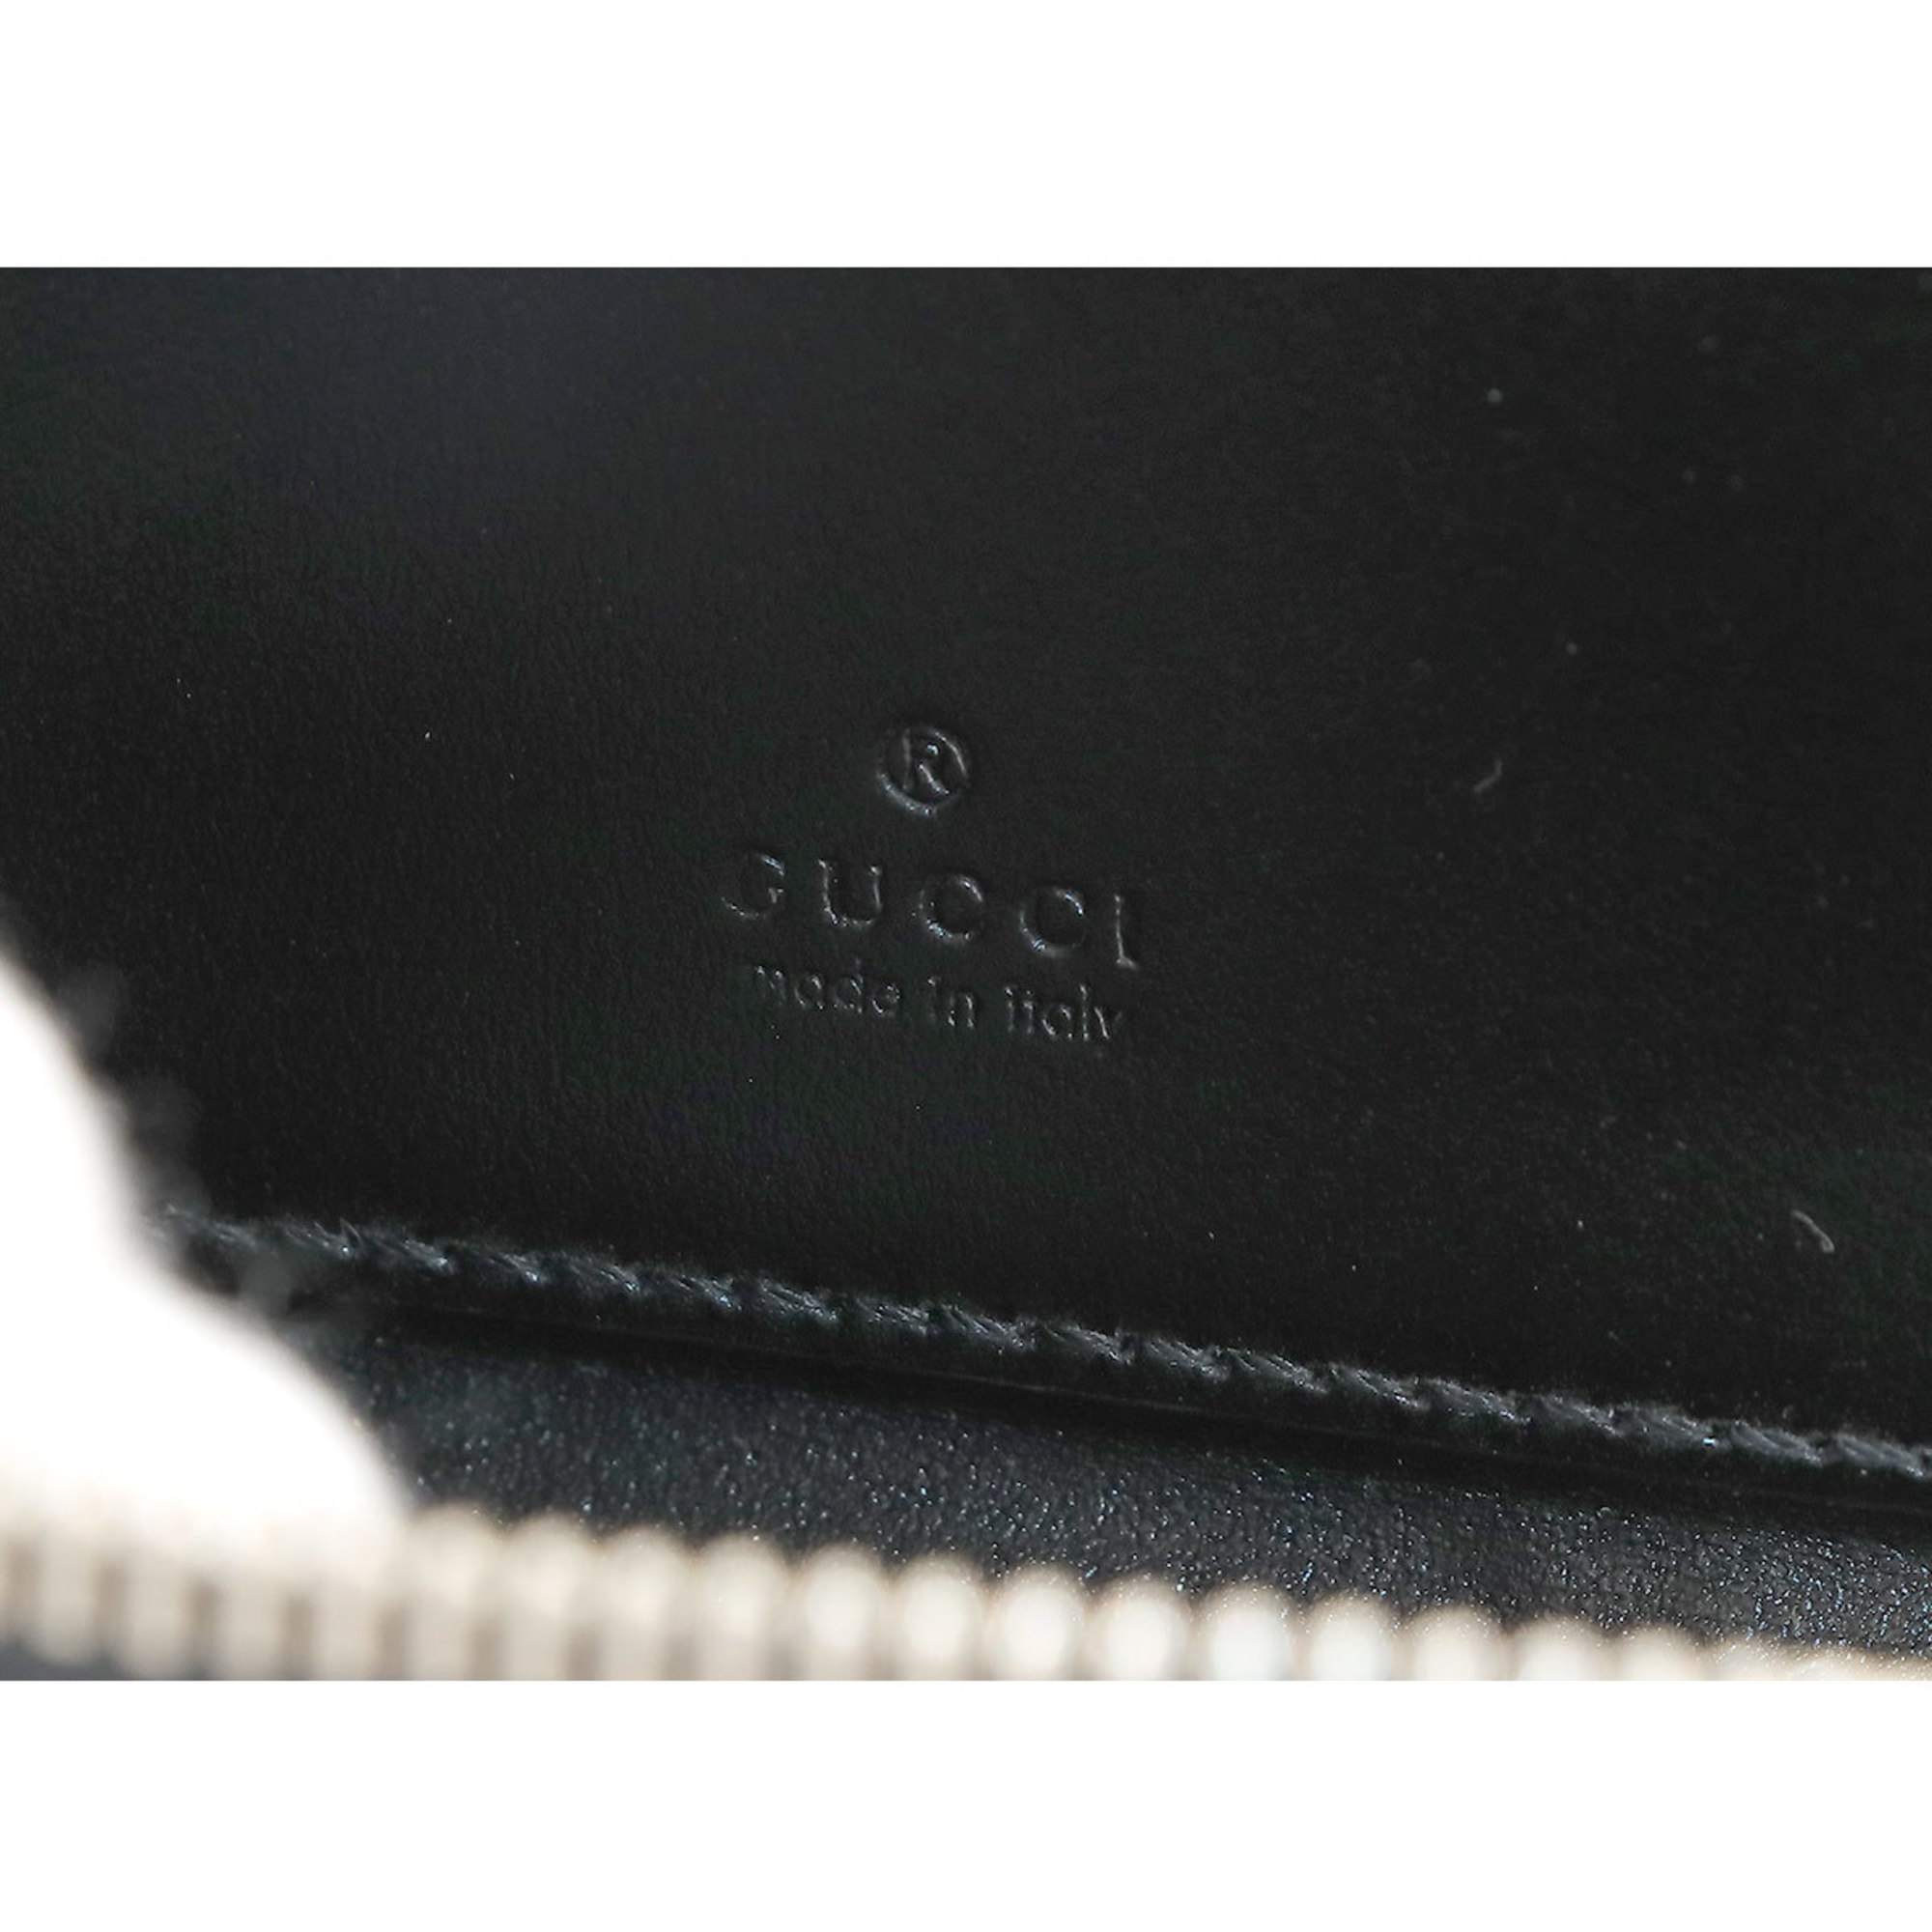 GUCCI GG embossed L-shaped wallet/coin case, coin purse, leather, black, 657571, silver hardware, Coin Case